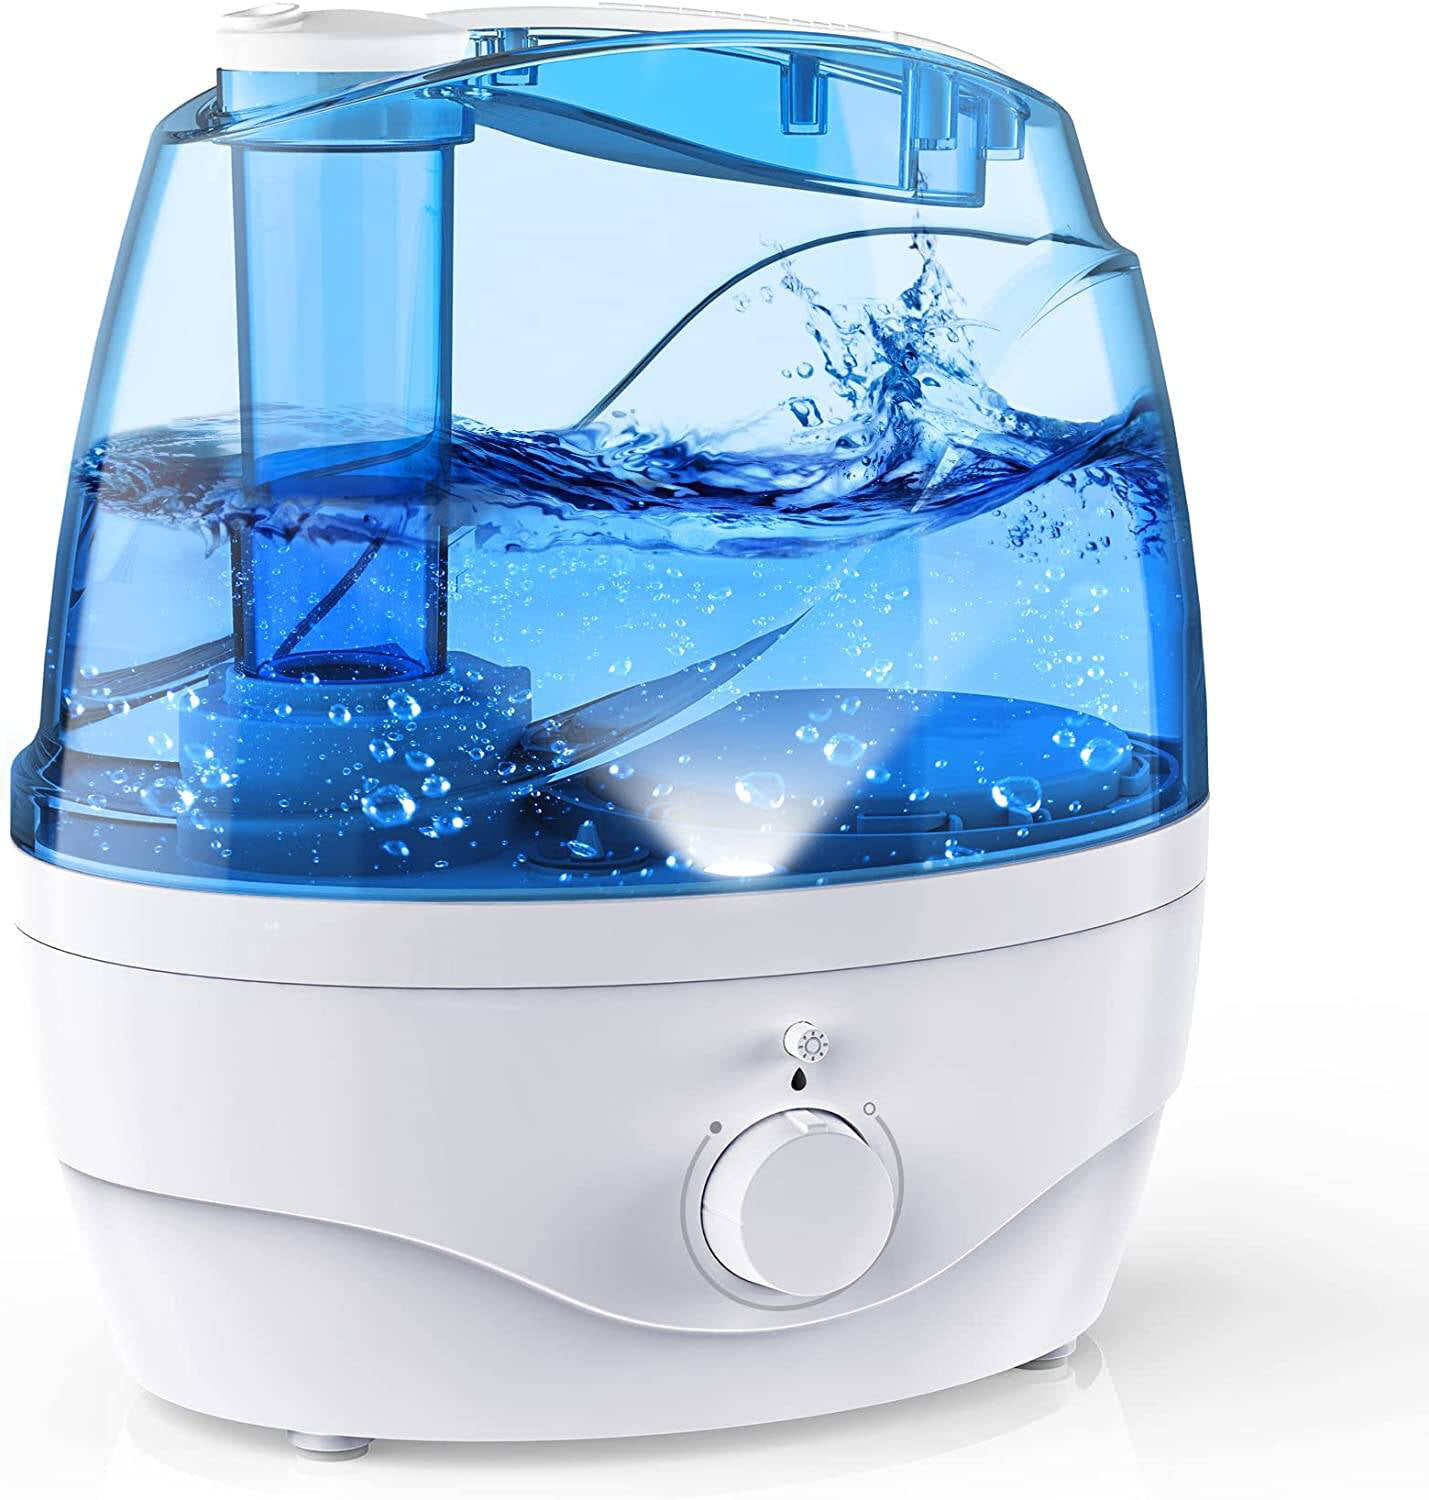 White&BLue DONGSHEN Cool Mist Humidifiers with 3L Large Water Tank,Works for up to 32 Hours,Night Lightand Auto Shut-Off,Ultrasonic Humidifier for Home,Bedroom,Babyroom and More. 